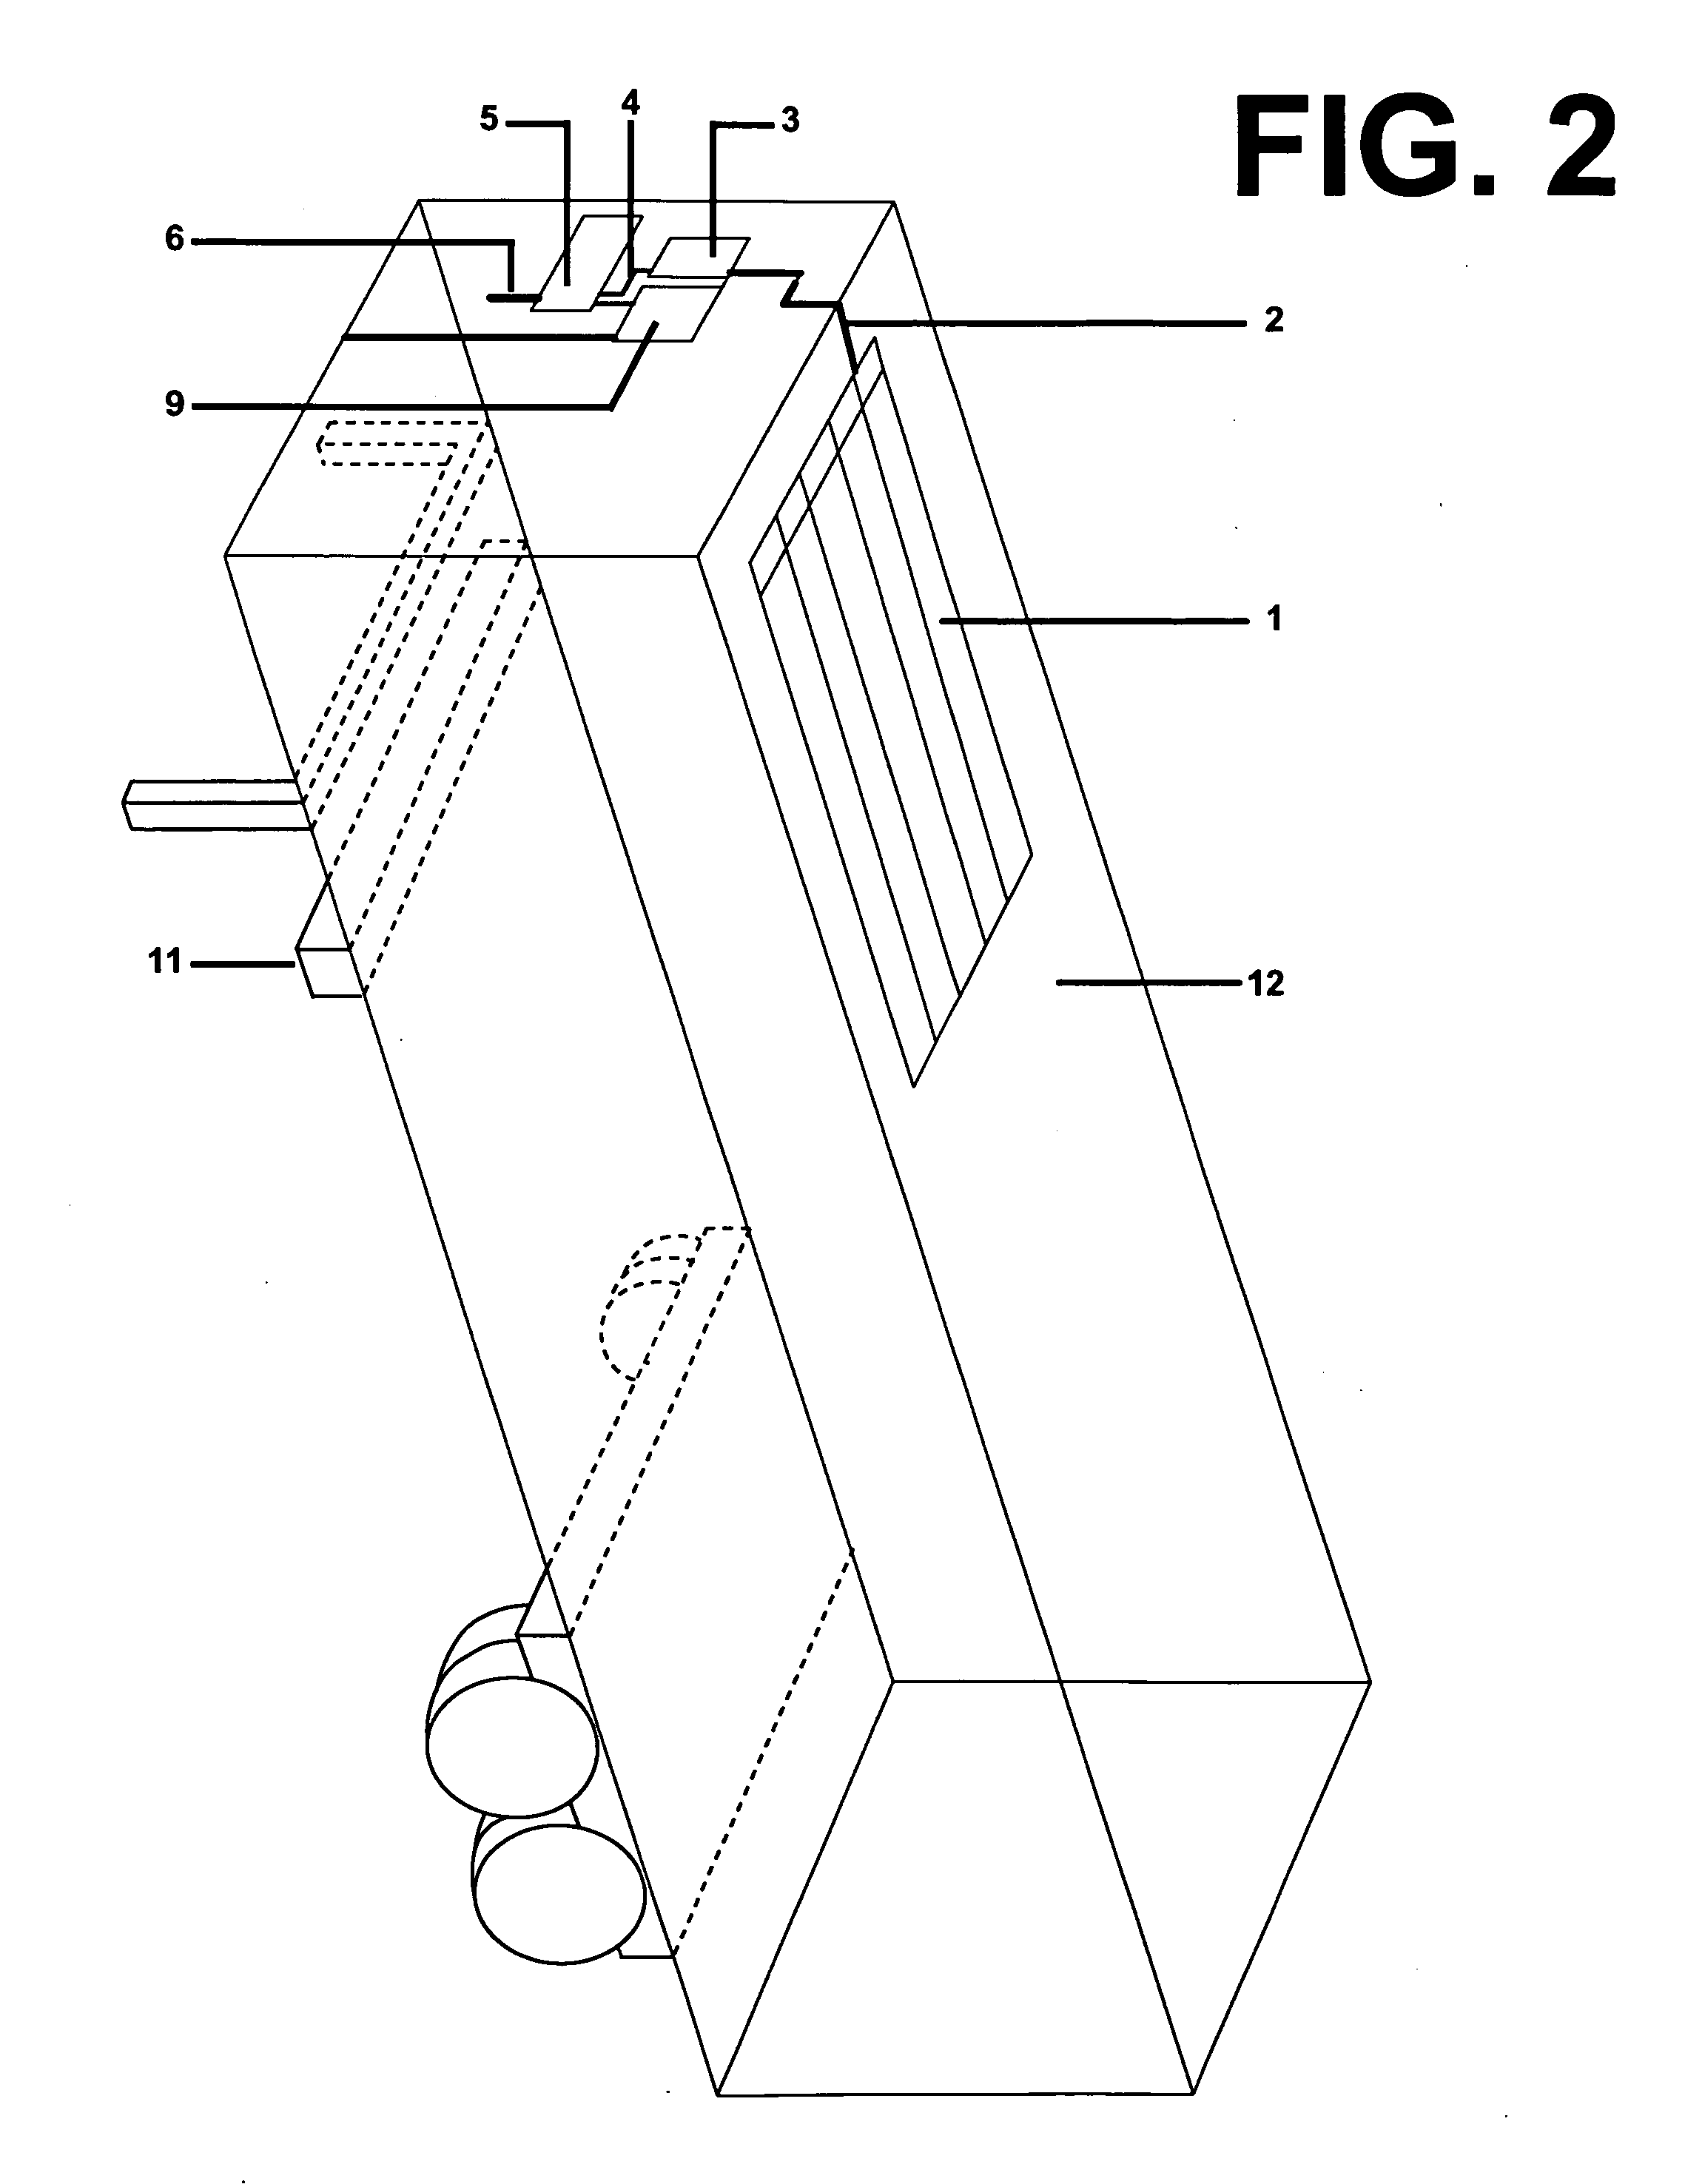 Method for generating electricity from solar panels for emergency power distribution center(s)